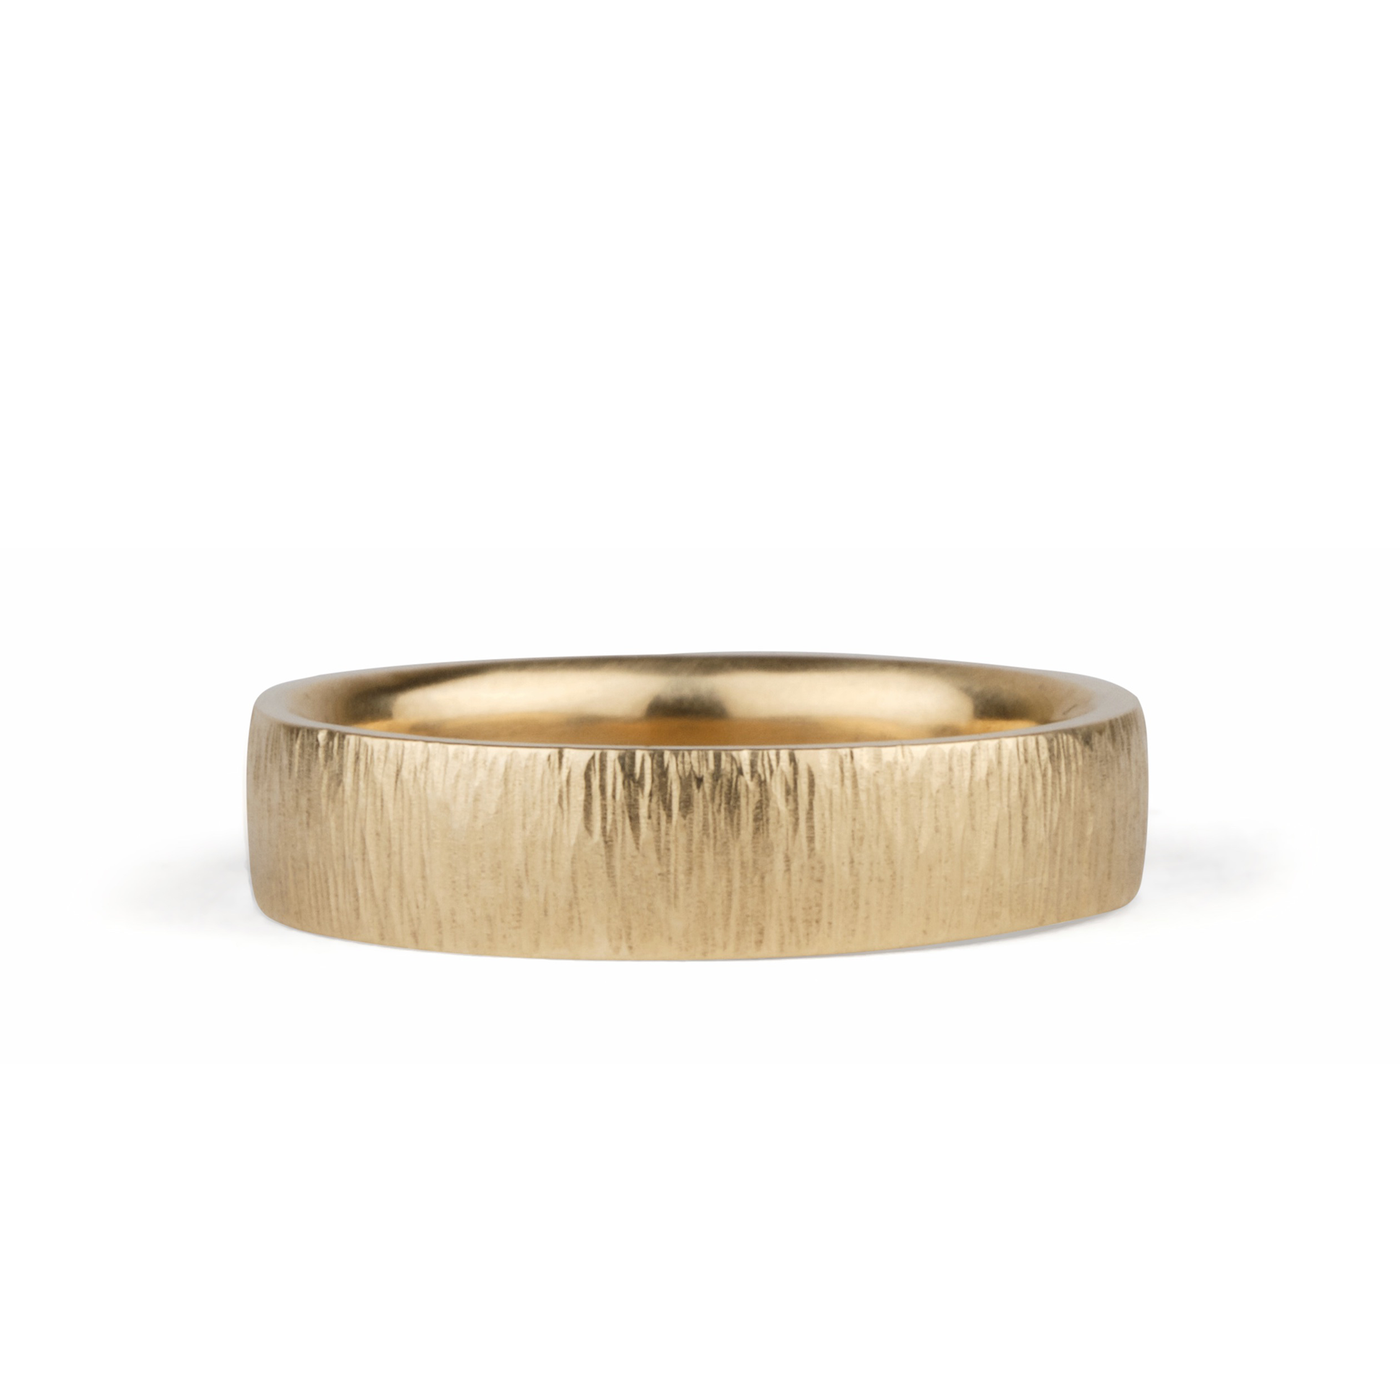 5mm Zion vertical Hammered 14k Yellow Gold Band by Corey Egan